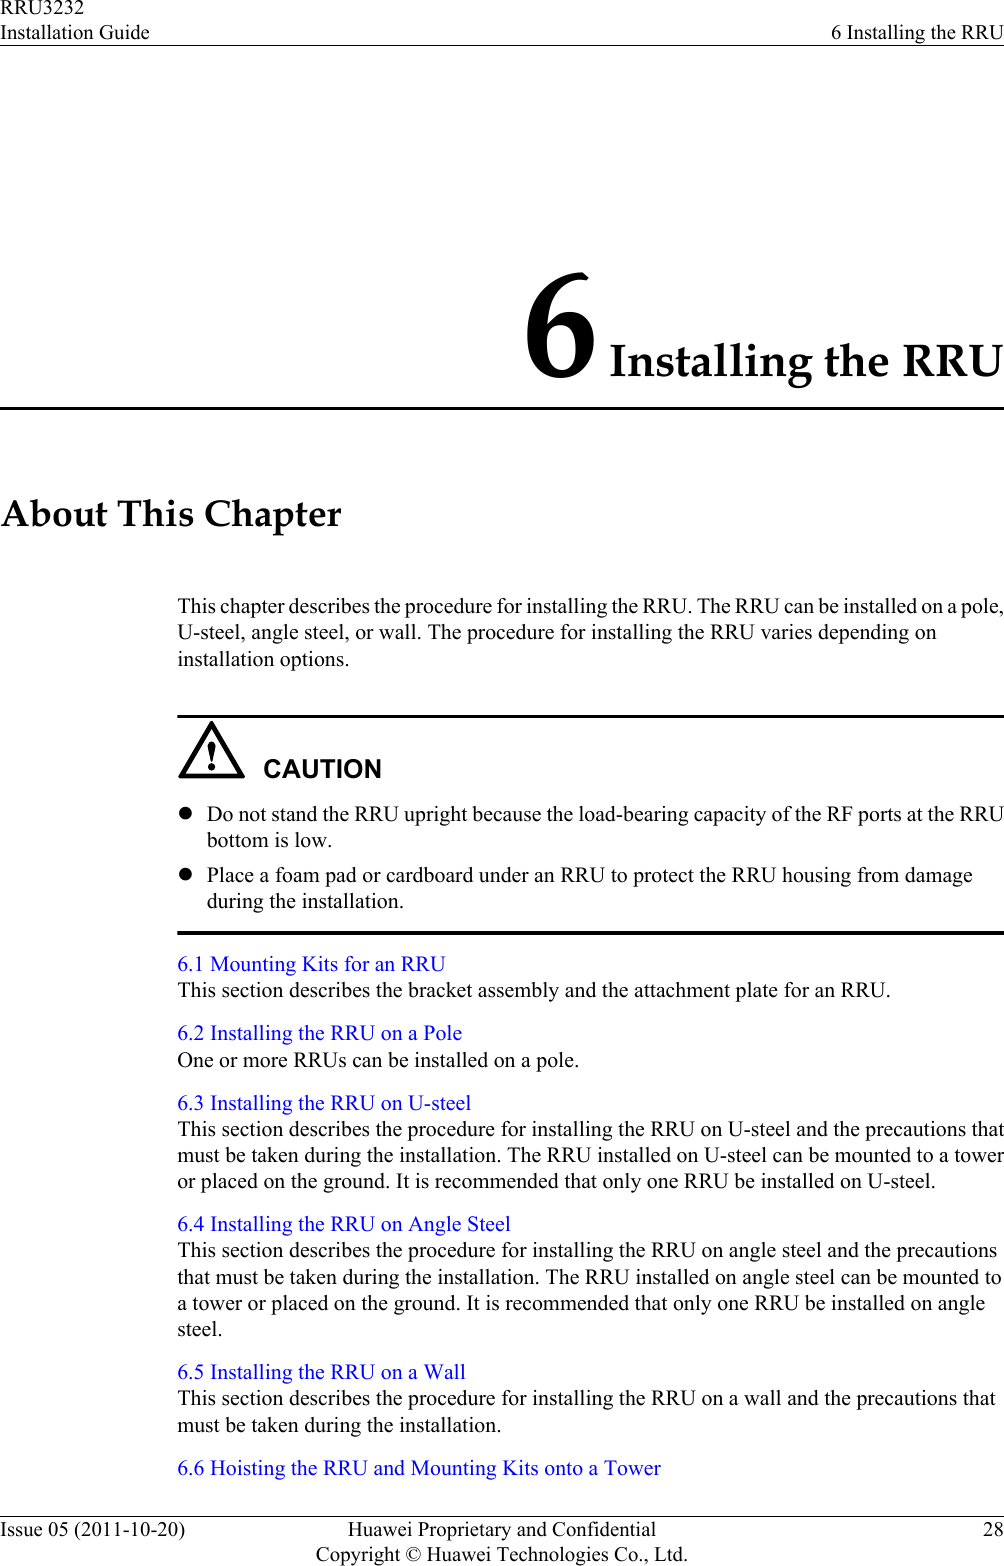 6 Installing the RRUAbout This ChapterThis chapter describes the procedure for installing the RRU. The RRU can be installed on a pole,U-steel, angle steel, or wall. The procedure for installing the RRU varies depending oninstallation options.CAUTIONlDo not stand the RRU upright because the load-bearing capacity of the RF ports at the RRUbottom is low.lPlace a foam pad or cardboard under an RRU to protect the RRU housing from damageduring the installation.6.1 Mounting Kits for an RRUThis section describes the bracket assembly and the attachment plate for an RRU.6.2 Installing the RRU on a PoleOne or more RRUs can be installed on a pole.6.3 Installing the RRU on U-steelThis section describes the procedure for installing the RRU on U-steel and the precautions thatmust be taken during the installation. The RRU installed on U-steel can be mounted to a toweror placed on the ground. It is recommended that only one RRU be installed on U-steel.6.4 Installing the RRU on Angle SteelThis section describes the procedure for installing the RRU on angle steel and the precautionsthat must be taken during the installation. The RRU installed on angle steel can be mounted toa tower or placed on the ground. It is recommended that only one RRU be installed on anglesteel.6.5 Installing the RRU on a WallThis section describes the procedure for installing the RRU on a wall and the precautions thatmust be taken during the installation.6.6 Hoisting the RRU and Mounting Kits onto a TowerRRU3232Installation Guide 6 Installing the RRUIssue 05 (2011-10-20) Huawei Proprietary and ConfidentialCopyright © Huawei Technologies Co., Ltd.28